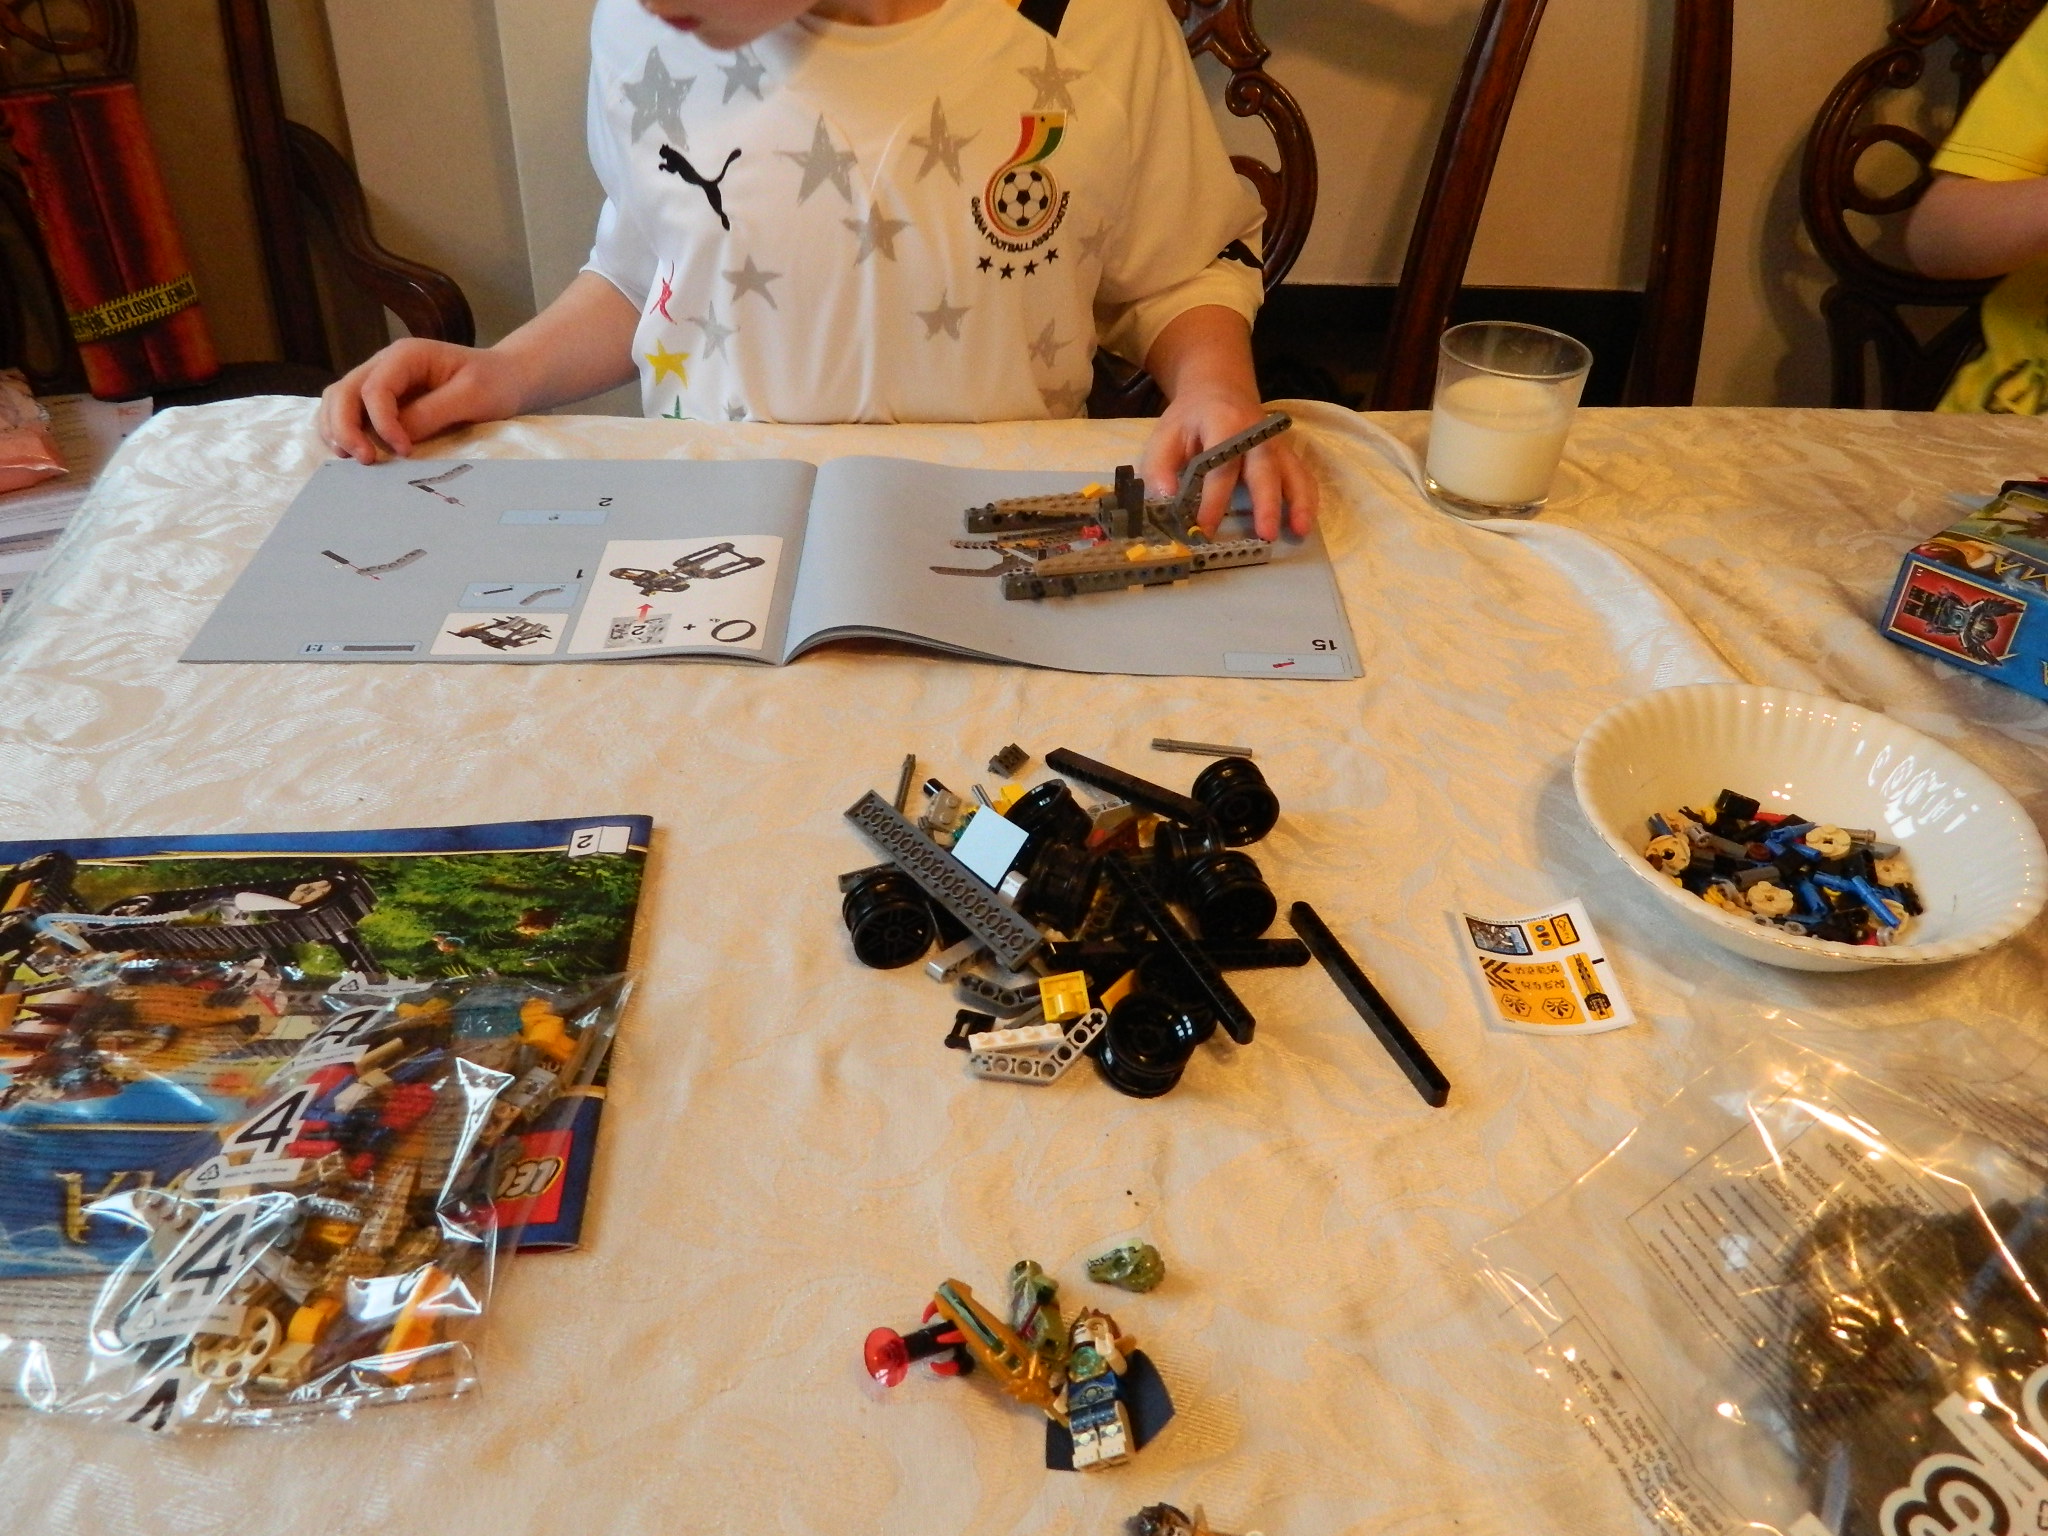 LEGO Legends of Chima Laval's Royal Fighter